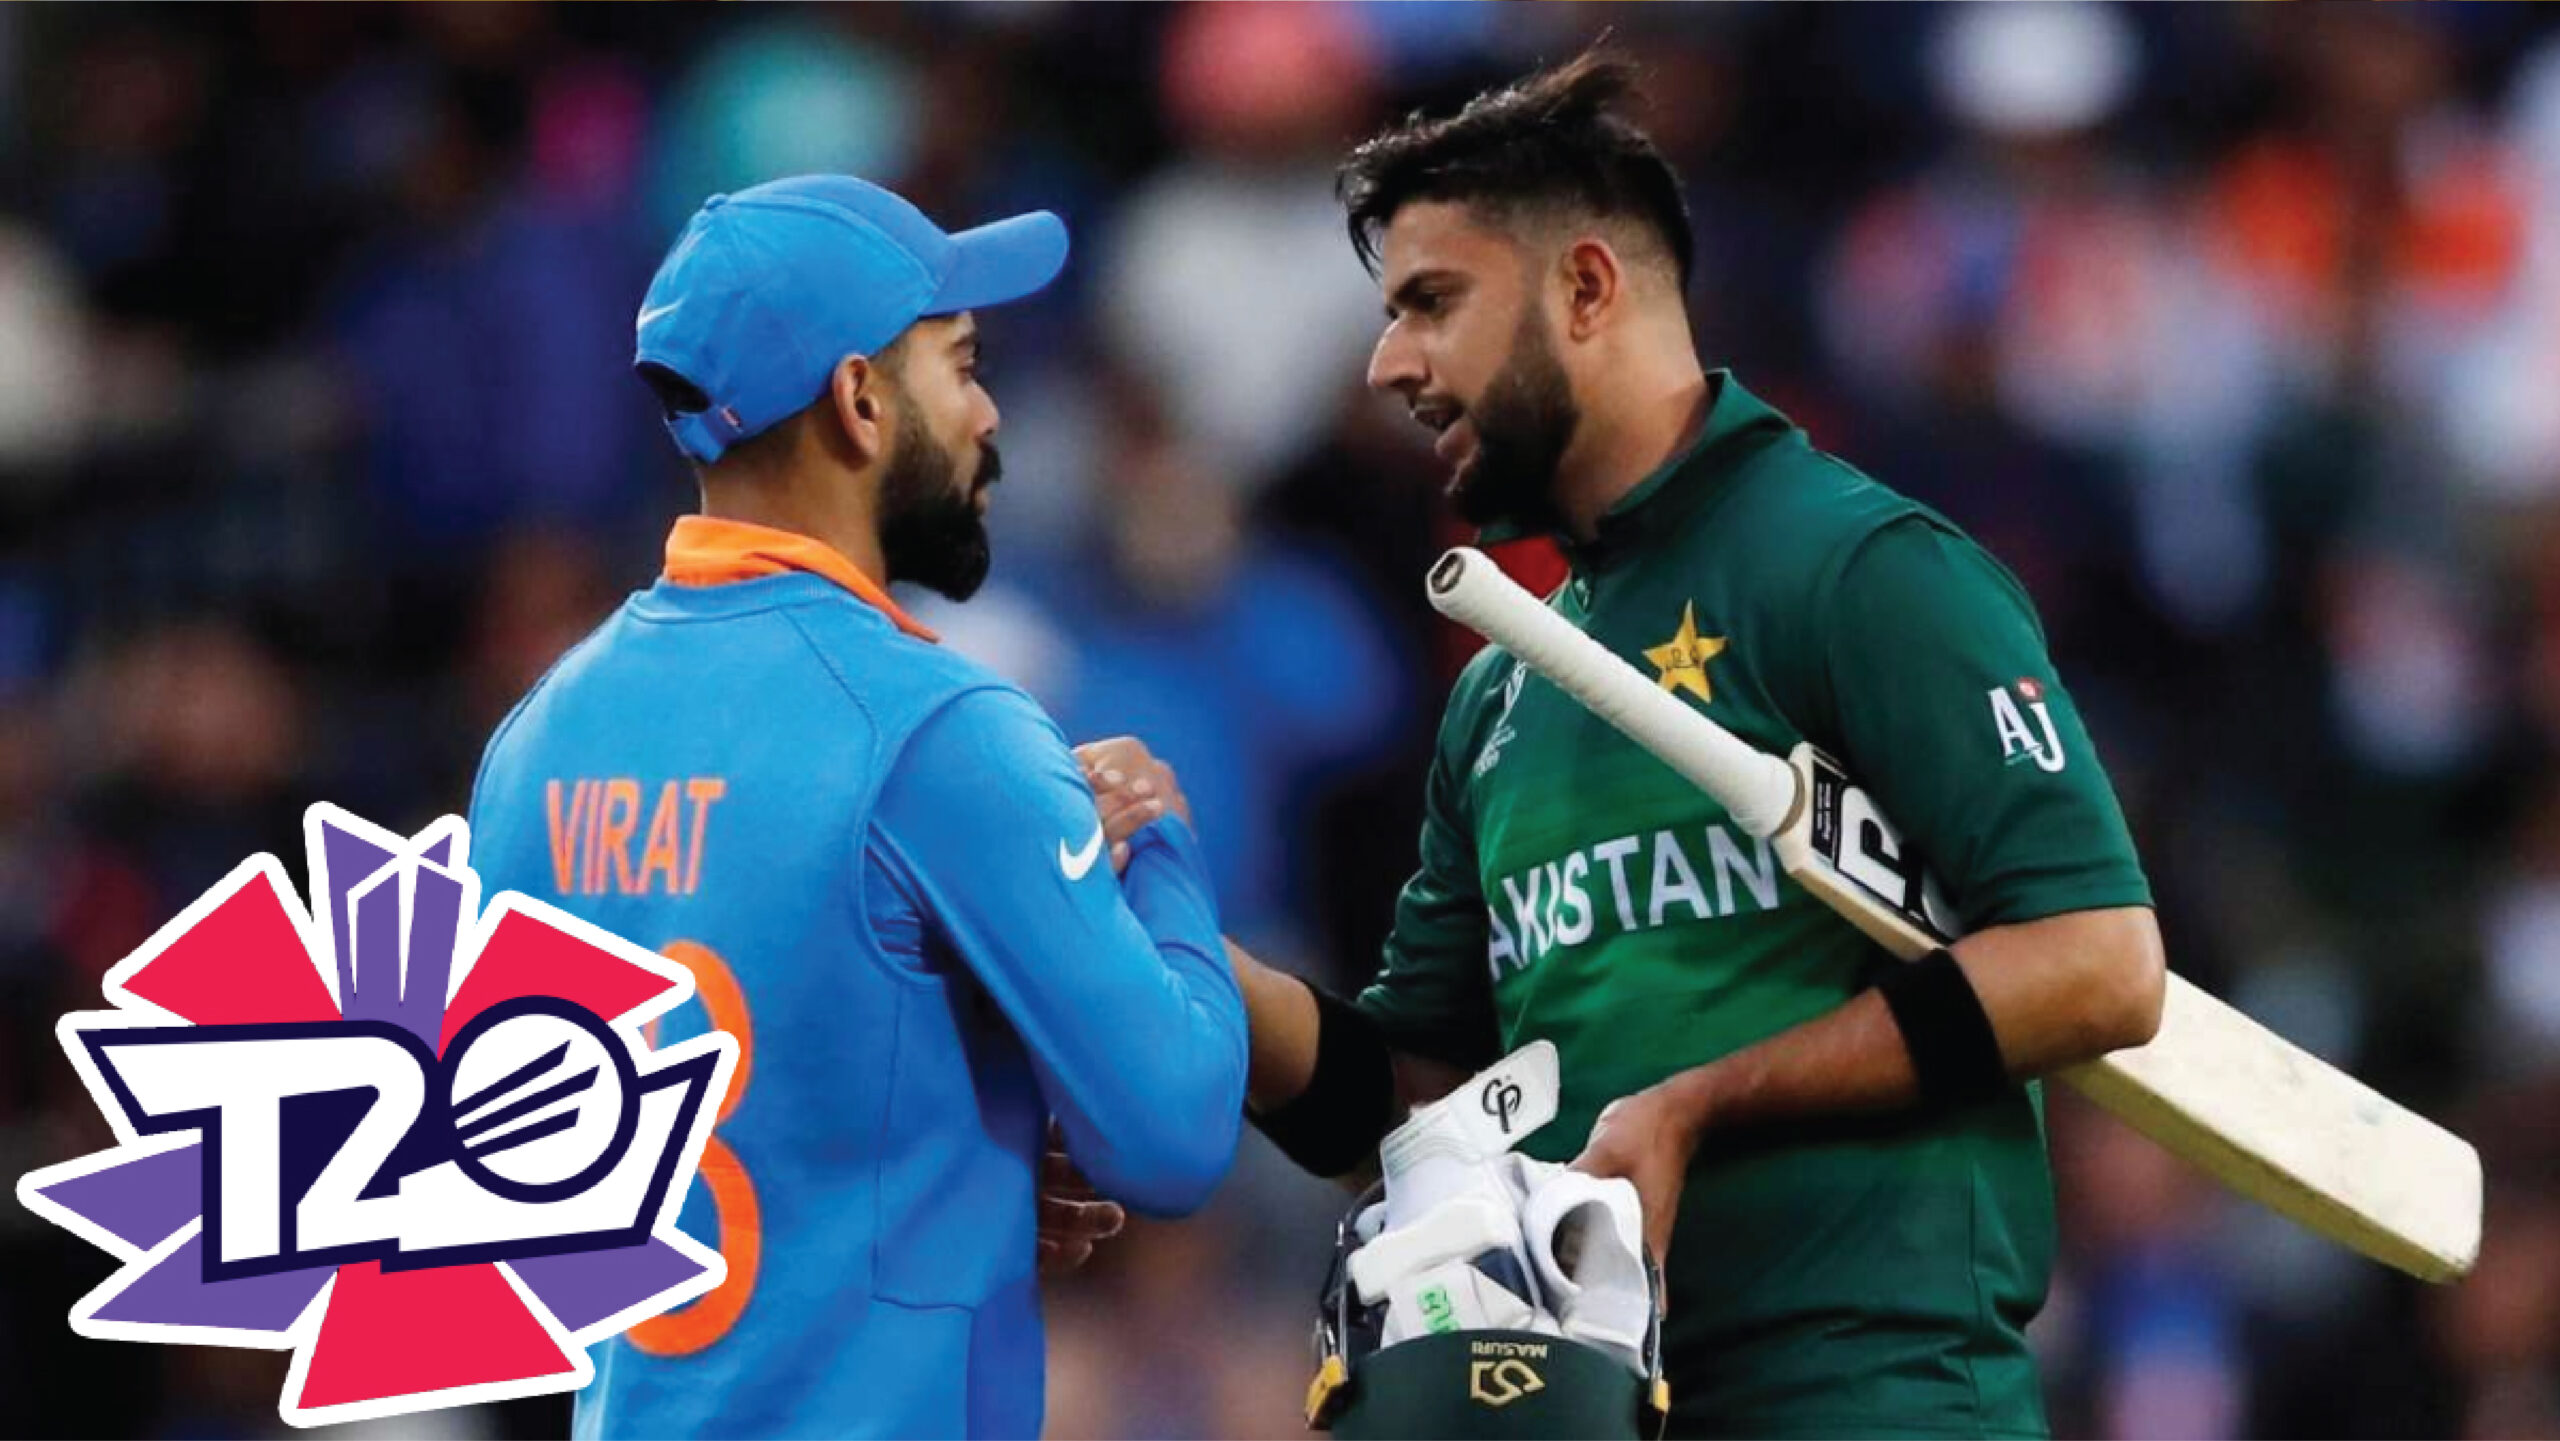 Will India boycott its game against Pakistan?